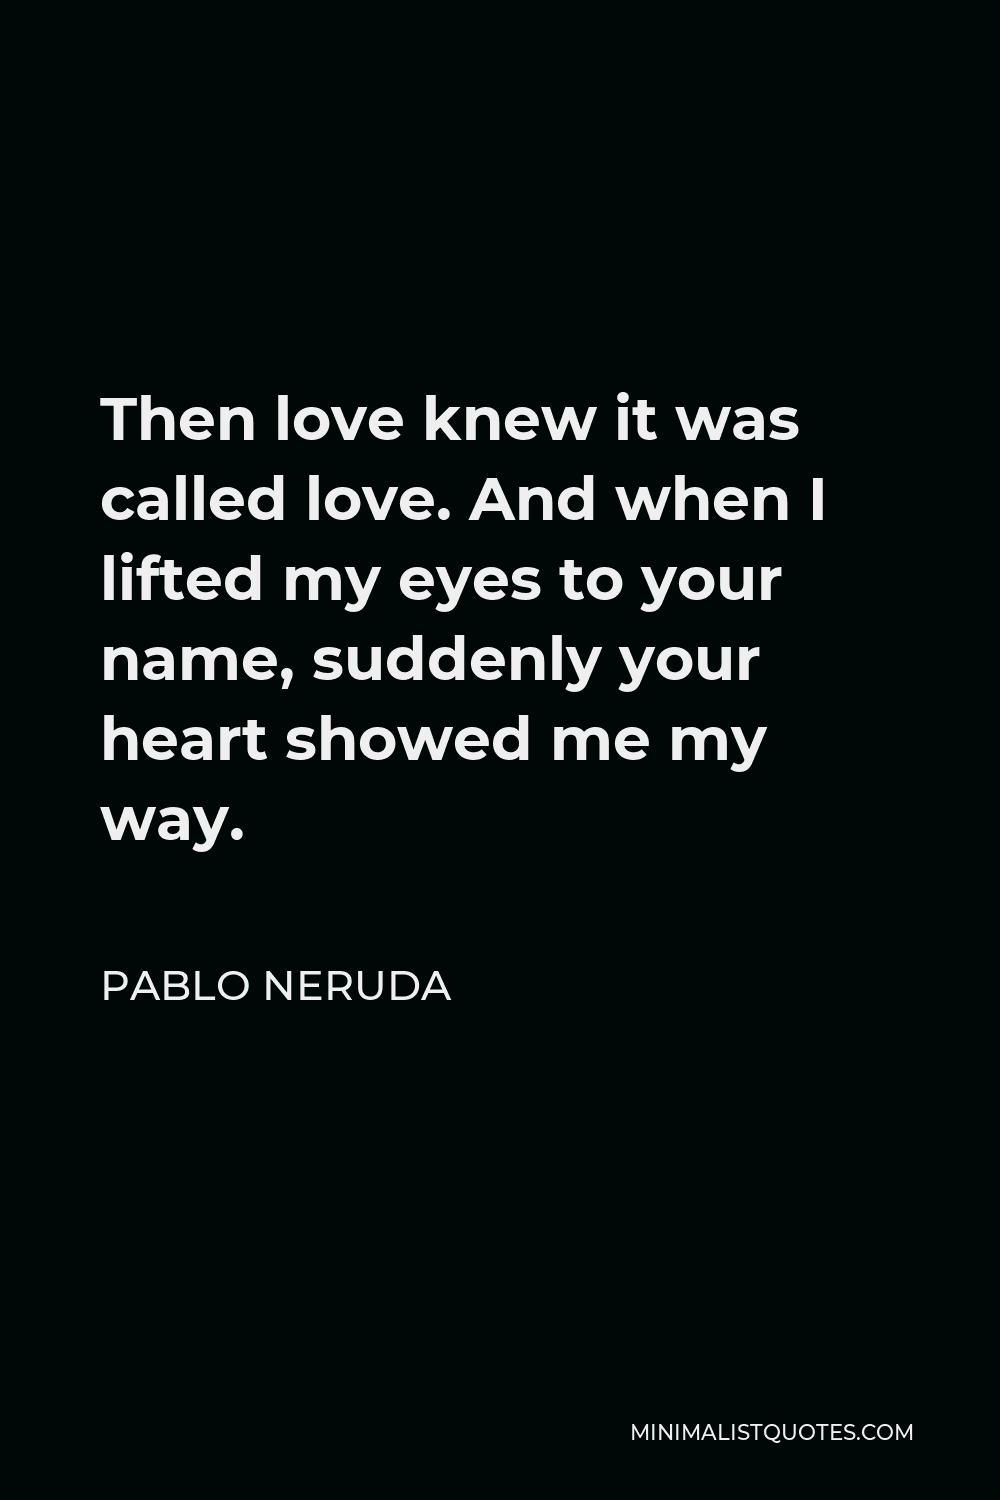 Pablo Neruda Quote Then Love Knew It Was Called Love And When I Lifted My Eyes To Your Name Suddenly Your Heart Showed Me My Way